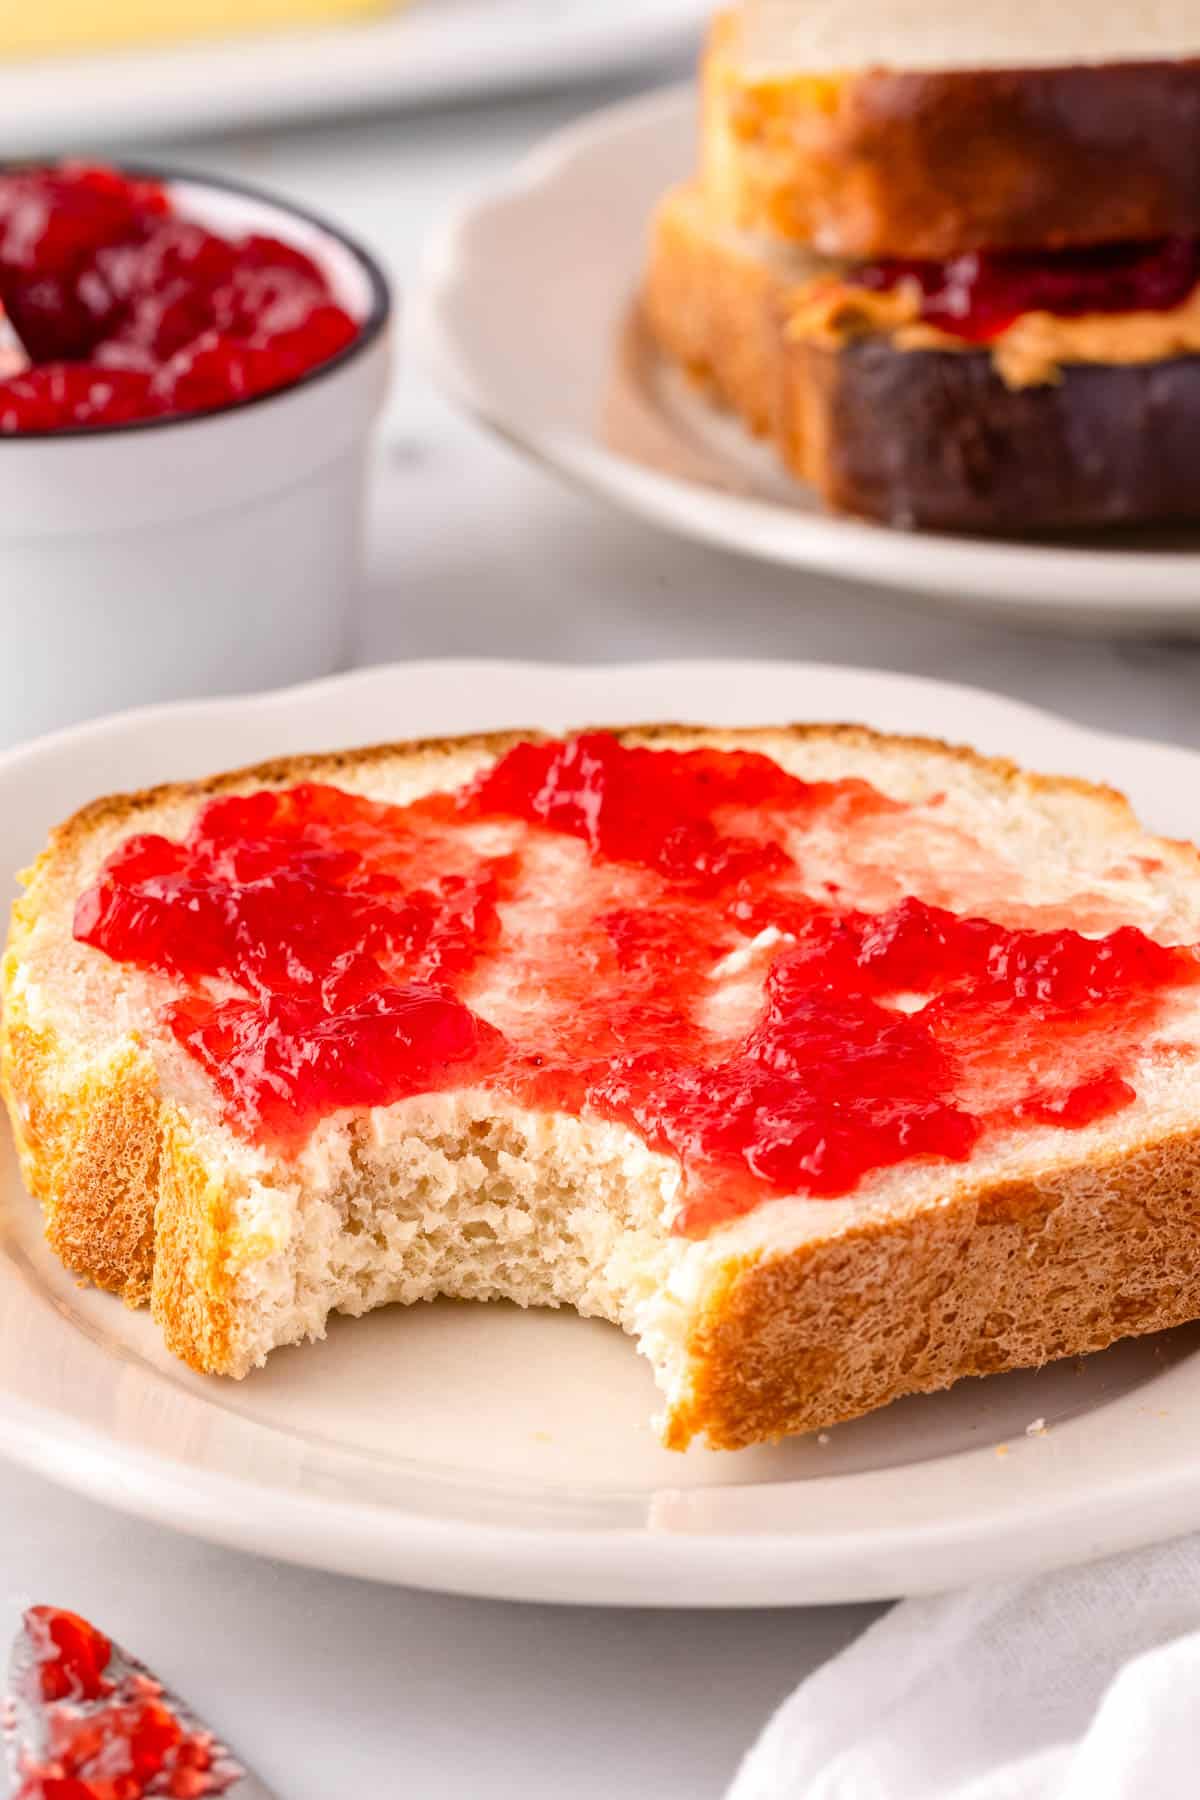 A slice of farmhouse bred with jam on it.